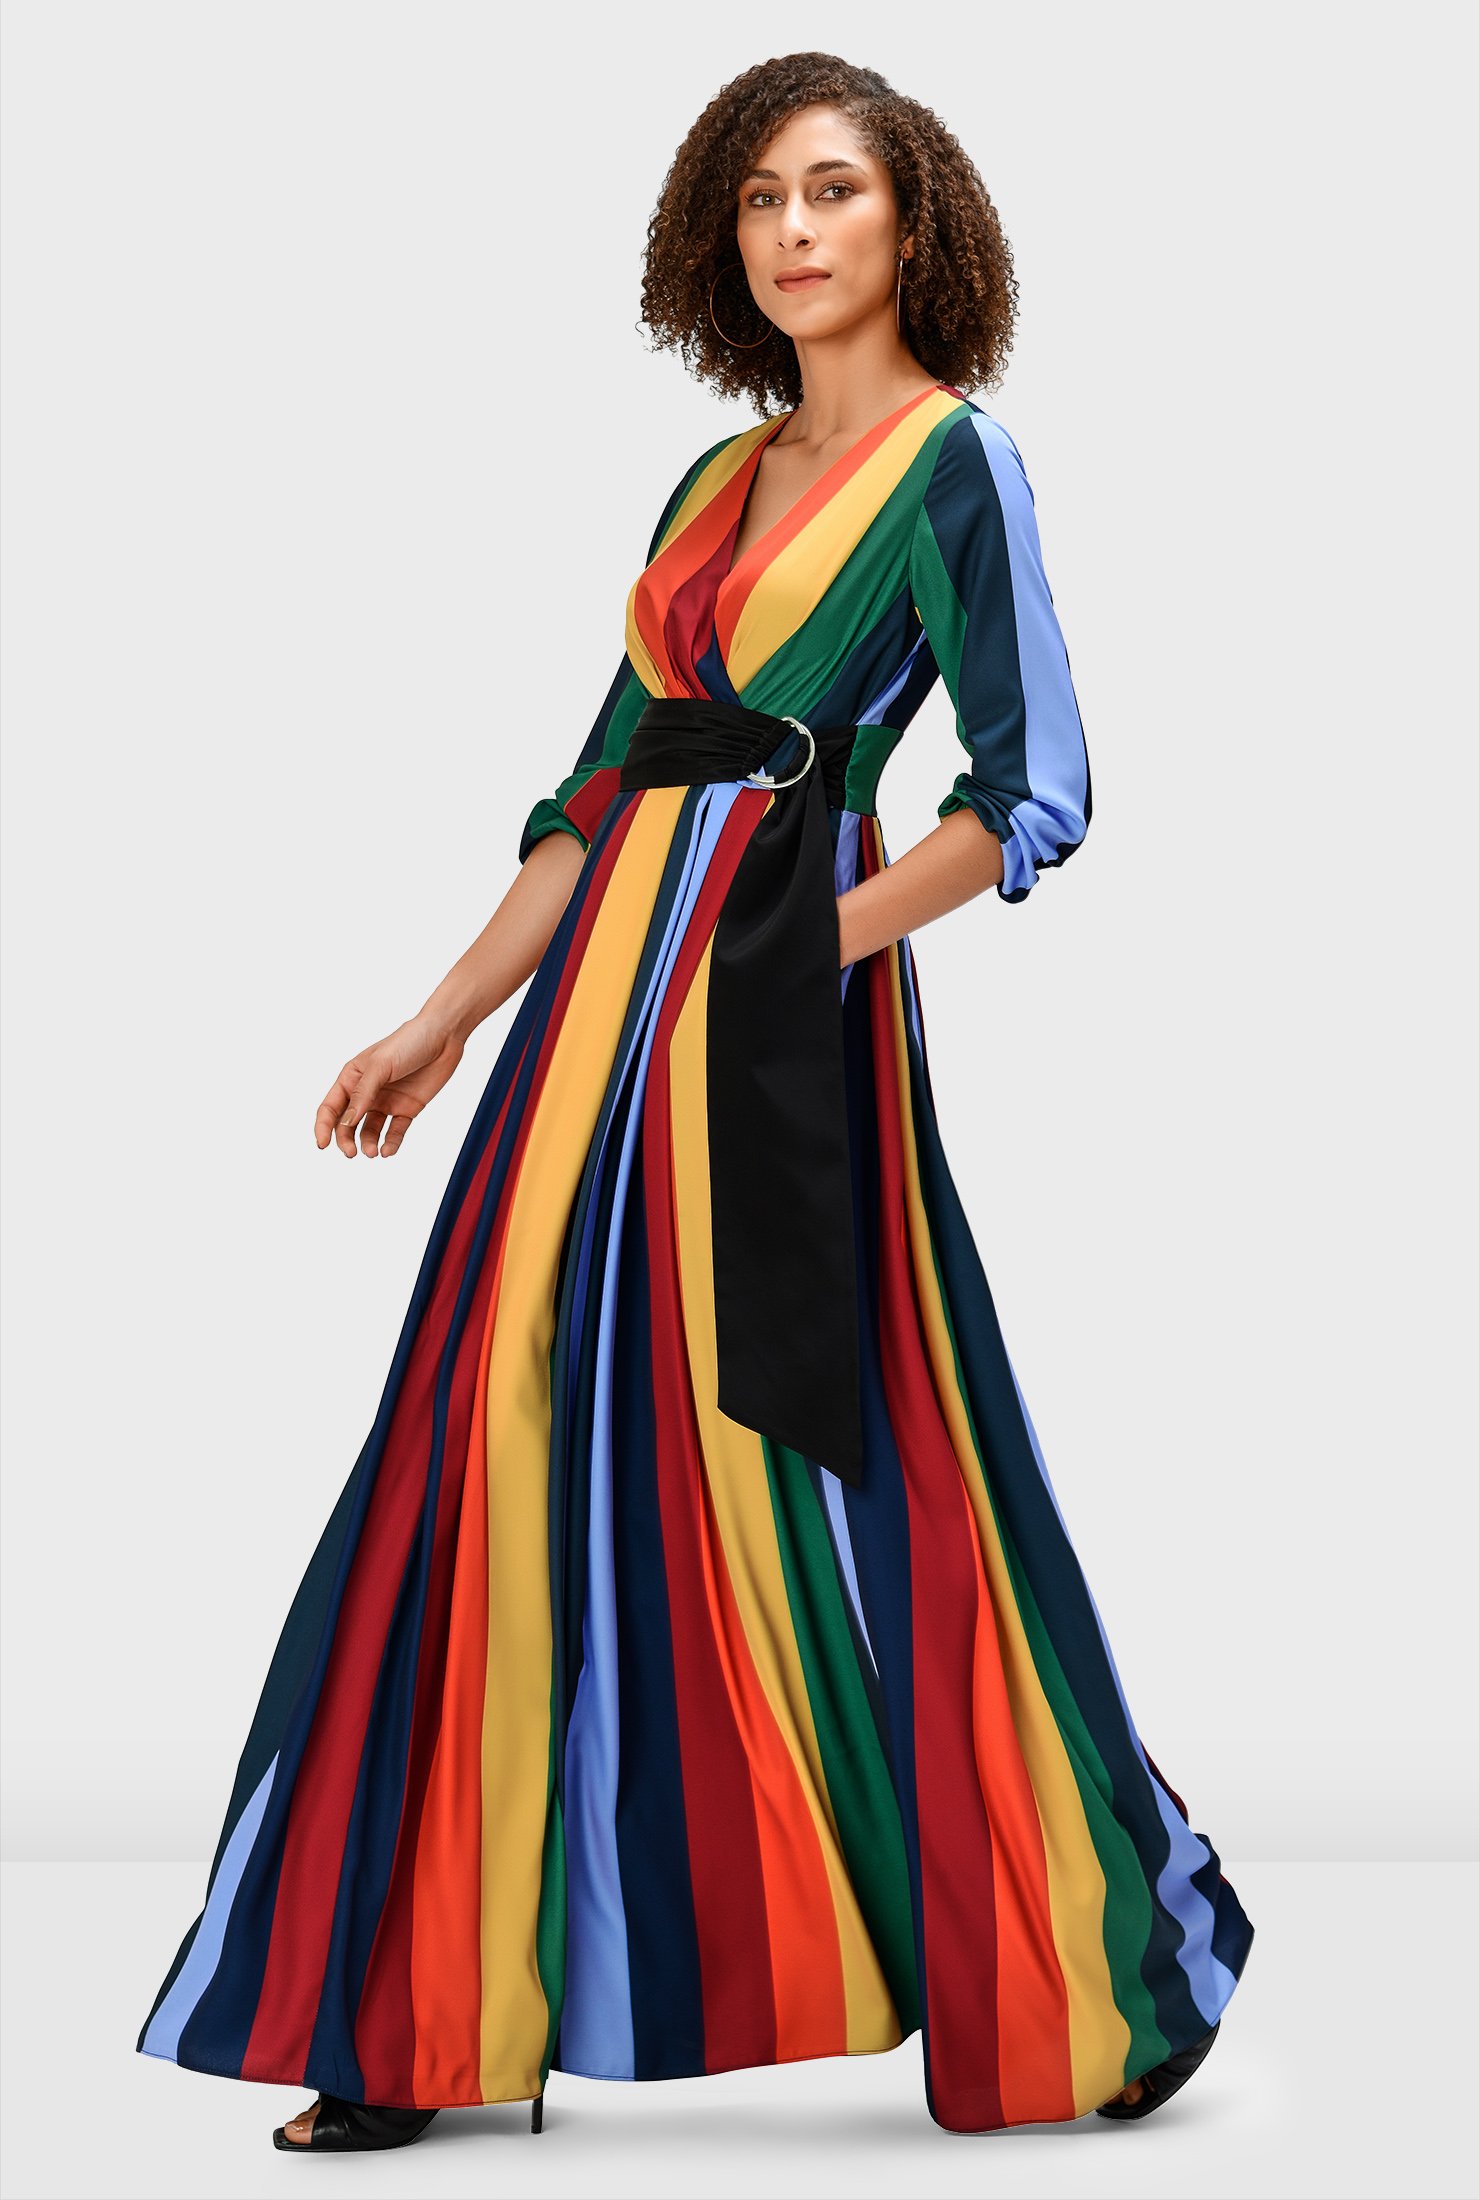 Multi-color stripe print in linear lines adds a slimming effect to our breezy crepe maxi dress detailed with a pleated surplice bodice and strategic ruching to ensure a flattering fit.